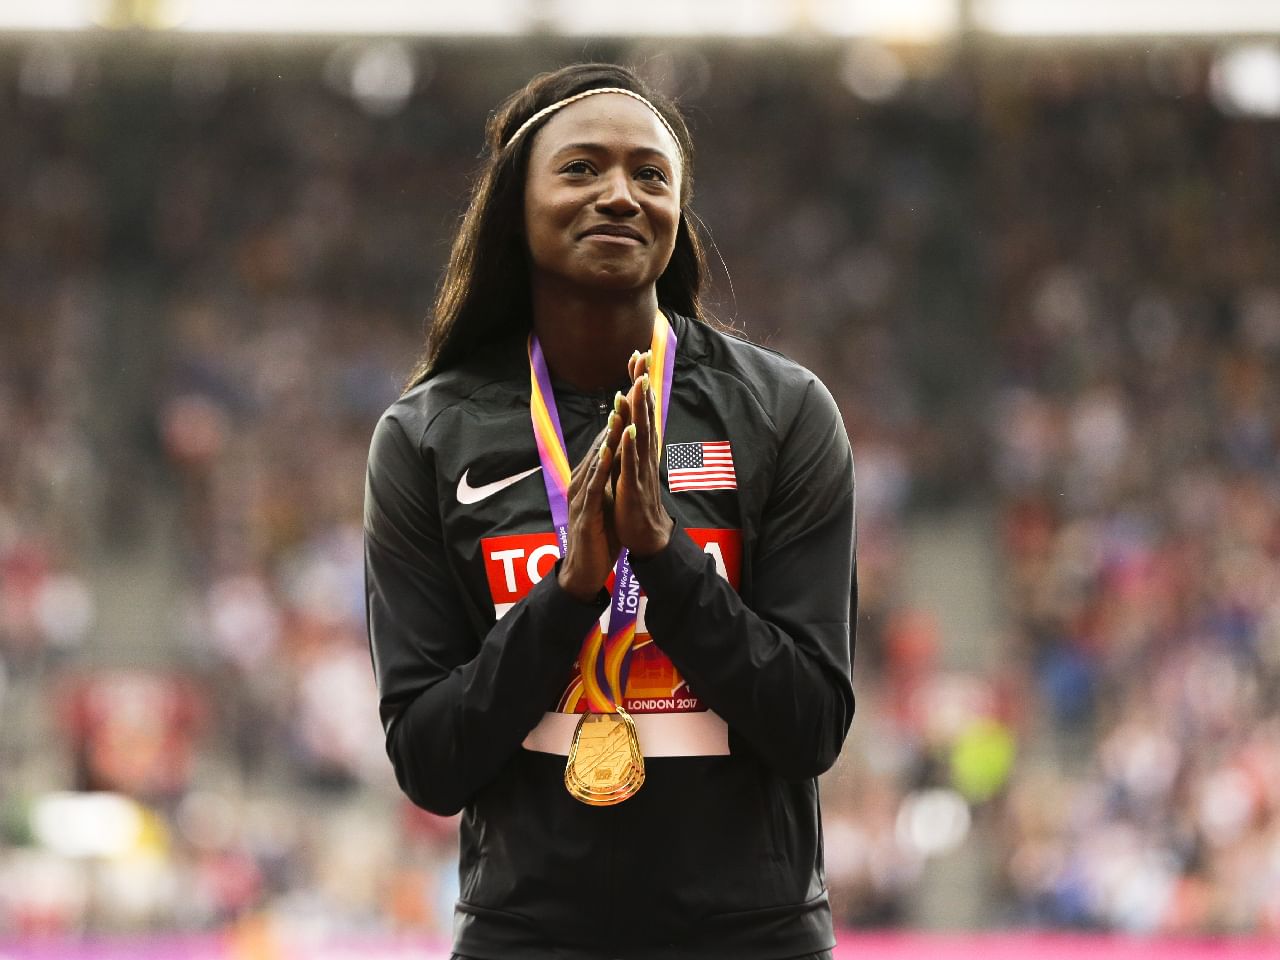 Olympic medal-winning sprinter Bowie mourned after death at 32